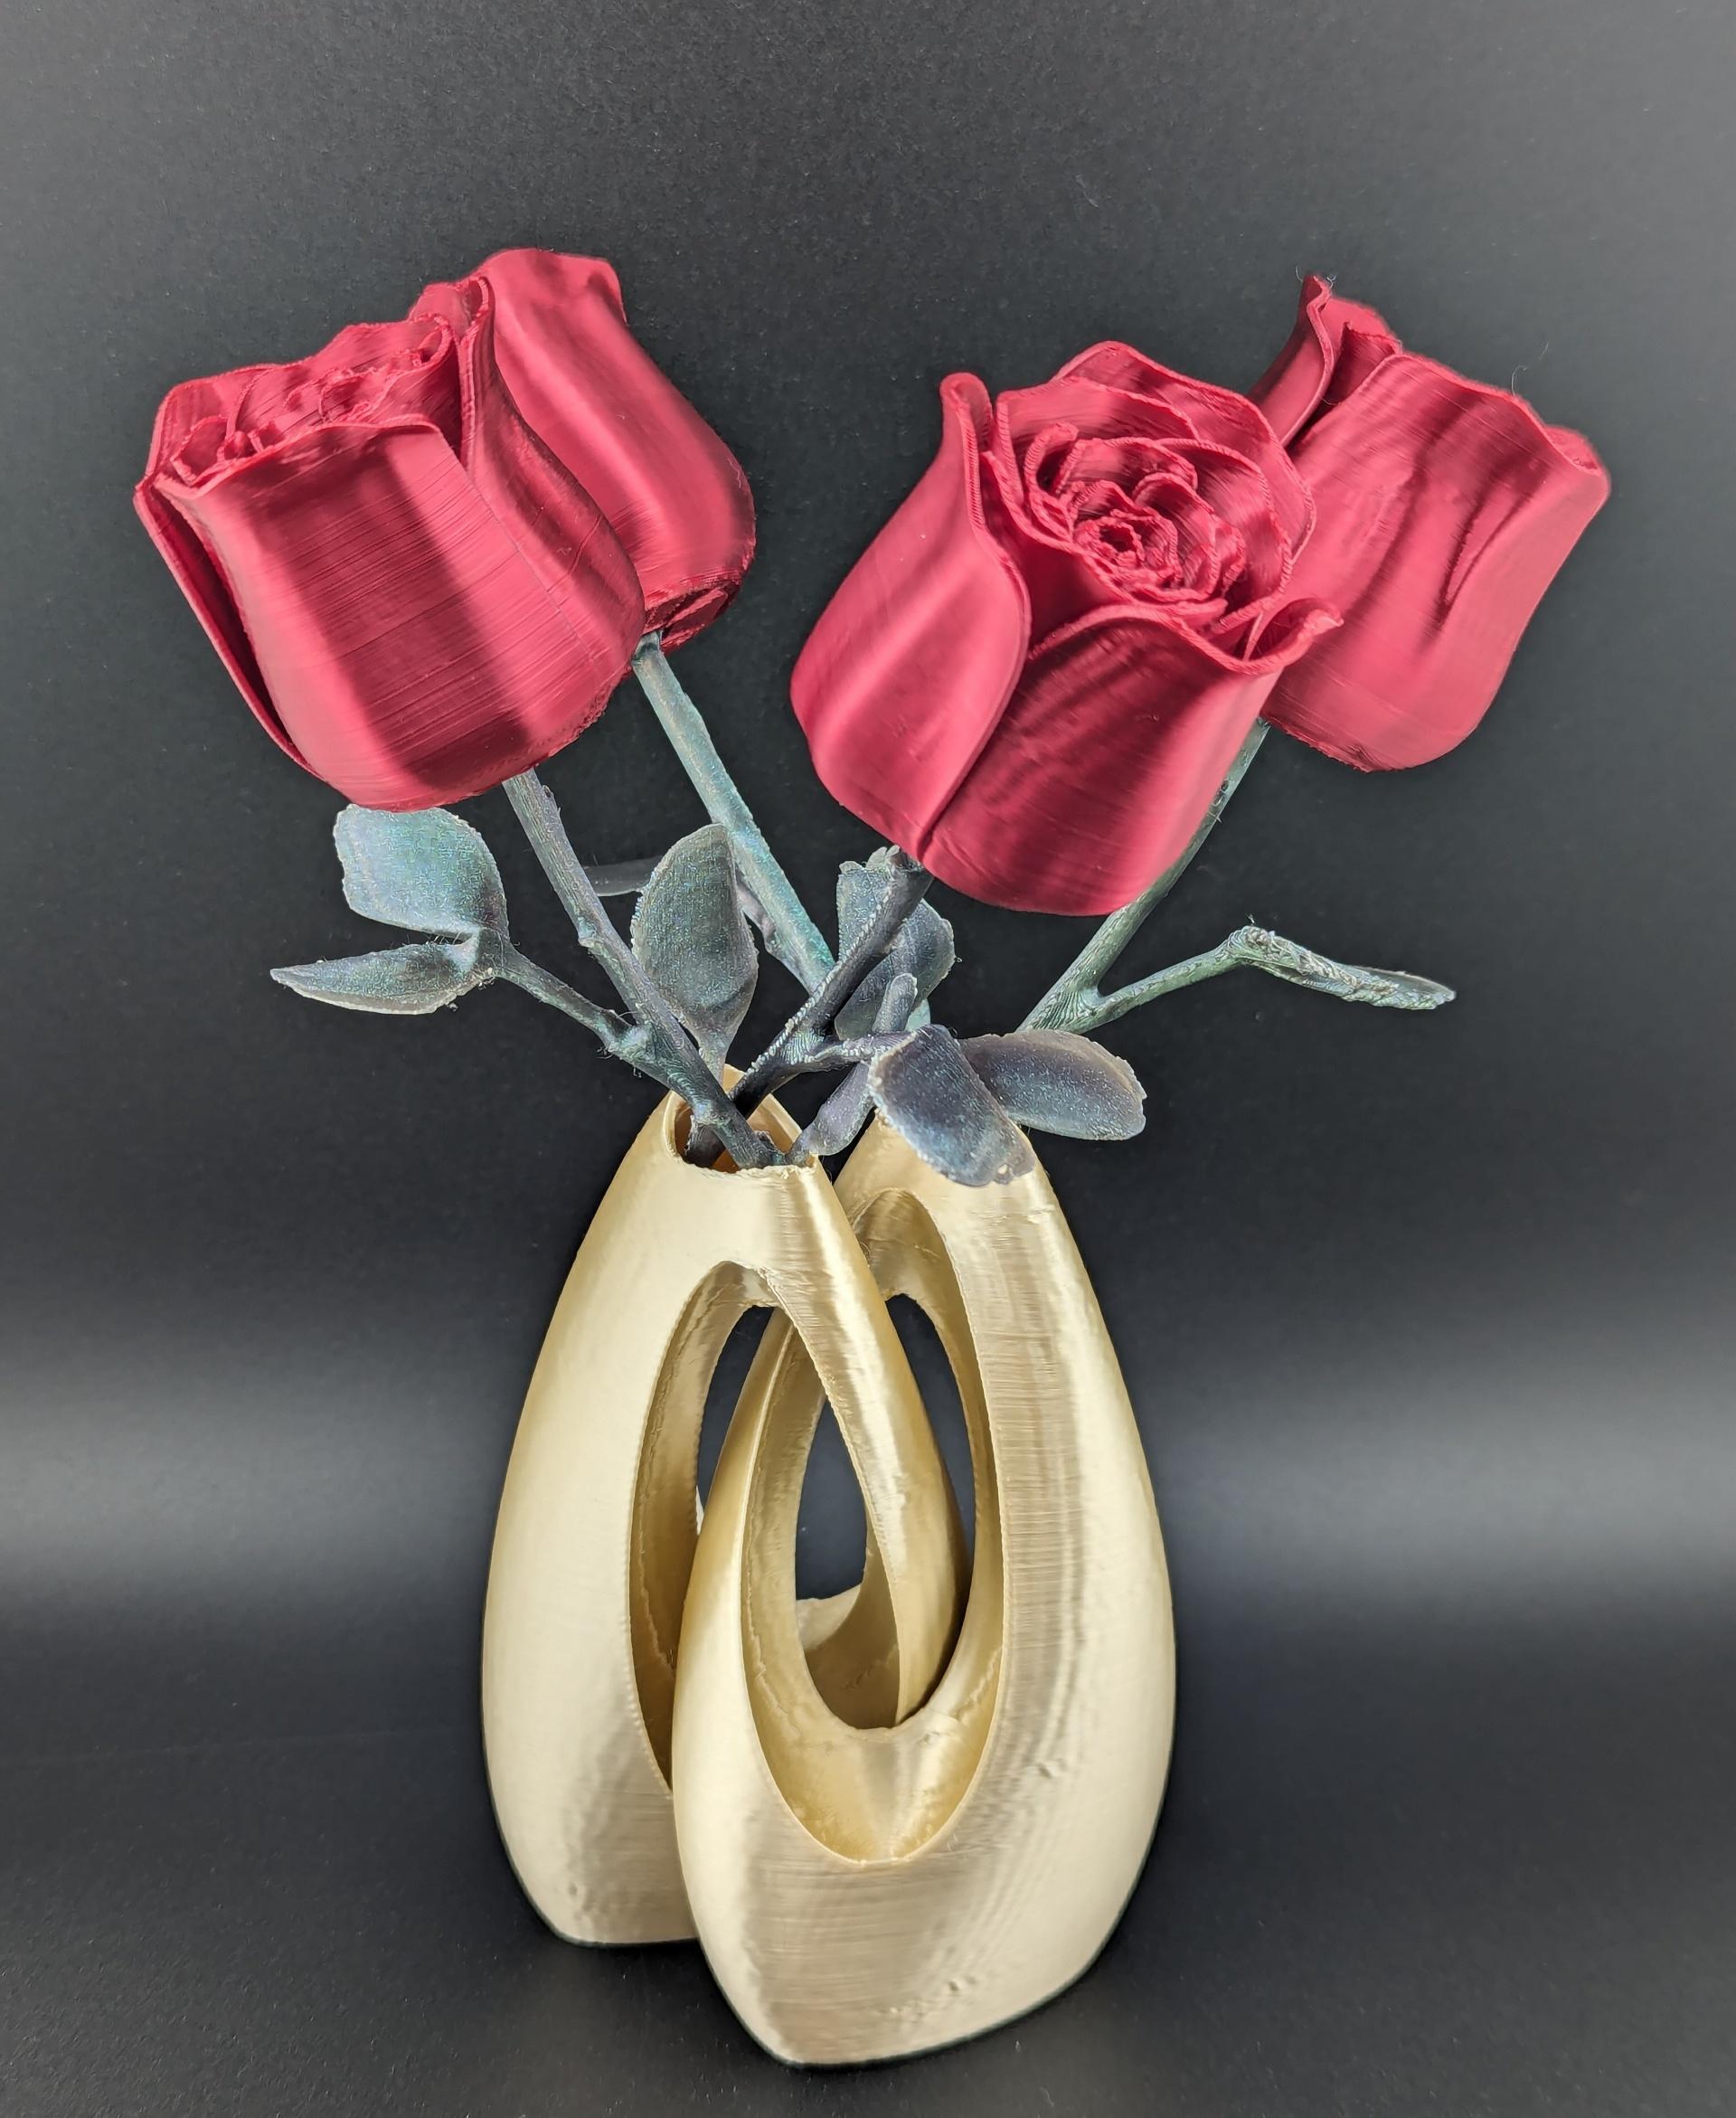 Rose - It took a little trial on the stem but the roses turnout amazing.  Also a little cheating with a drop of rose essential oil on each flower and I am about to go make my mothers day with a surprise gift.  

I just need to tell her these do not need water or sunlight!

The filament used was the polymaker 2023 Christmas pack.  It makes a wonderful combination.  - 3d model